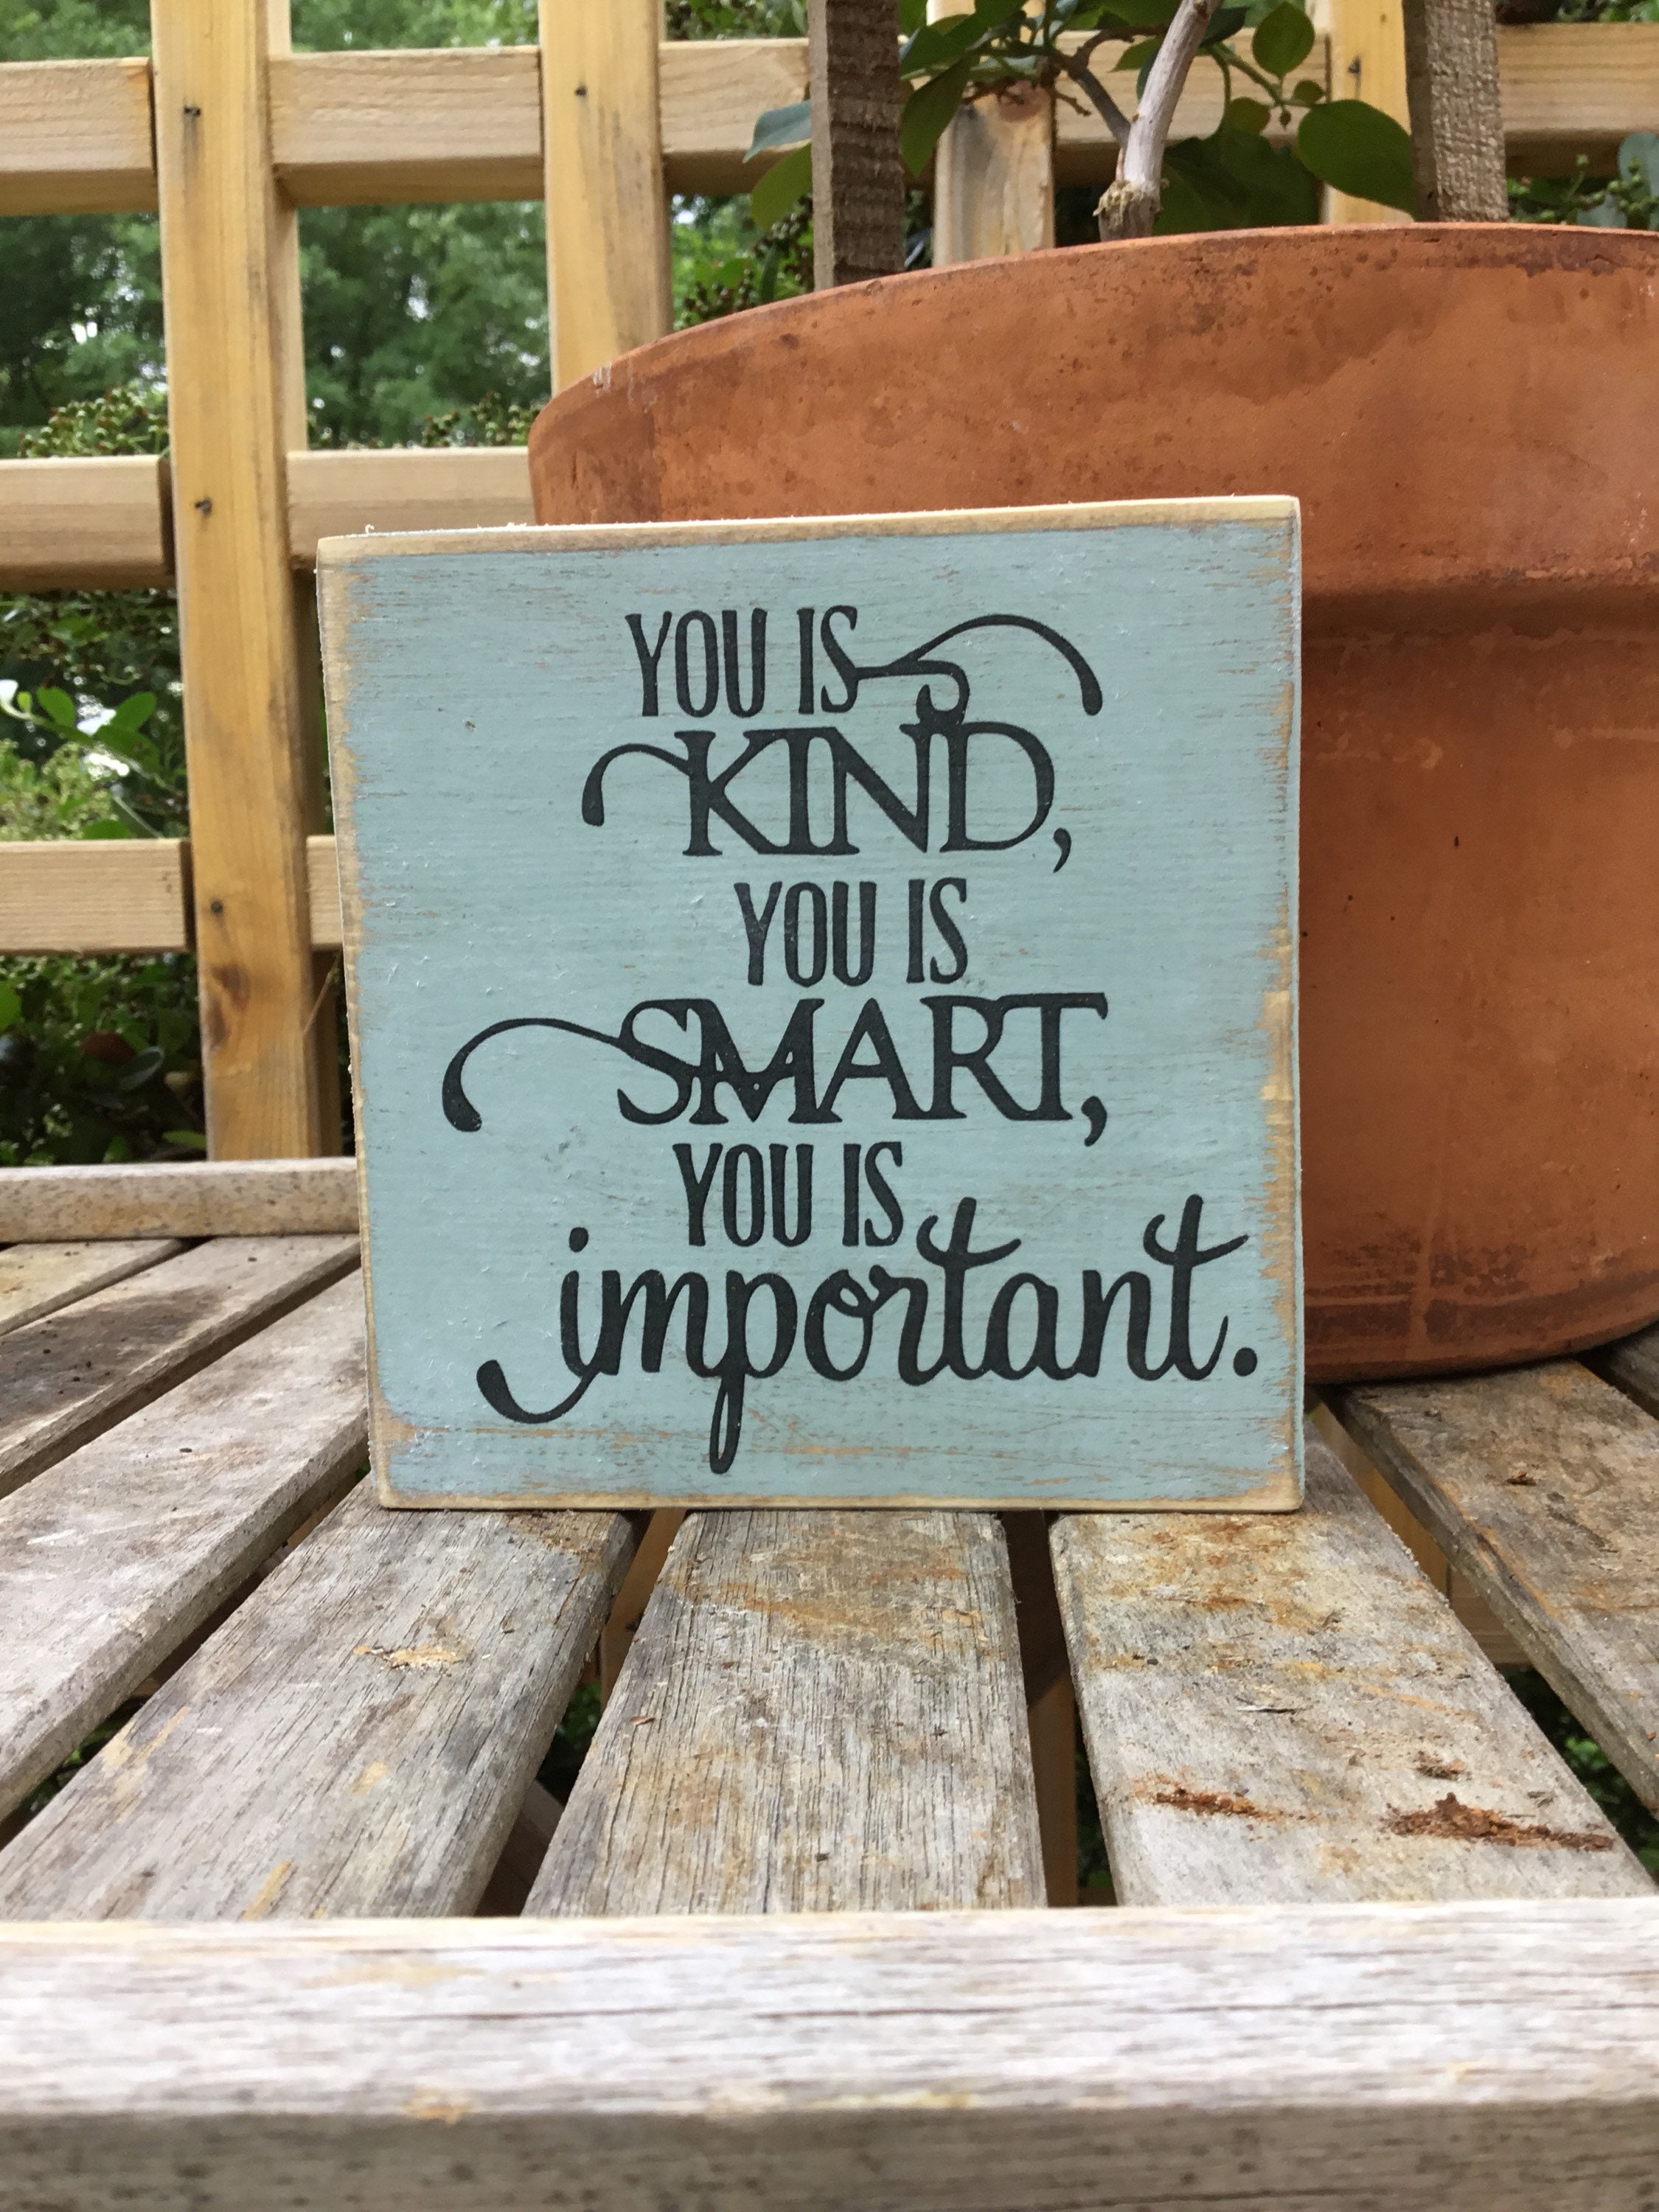 Mini Wood Sign Hostess Gift Gift for Child Housewarming Present You is Kind You is Smart Farmhouse Style